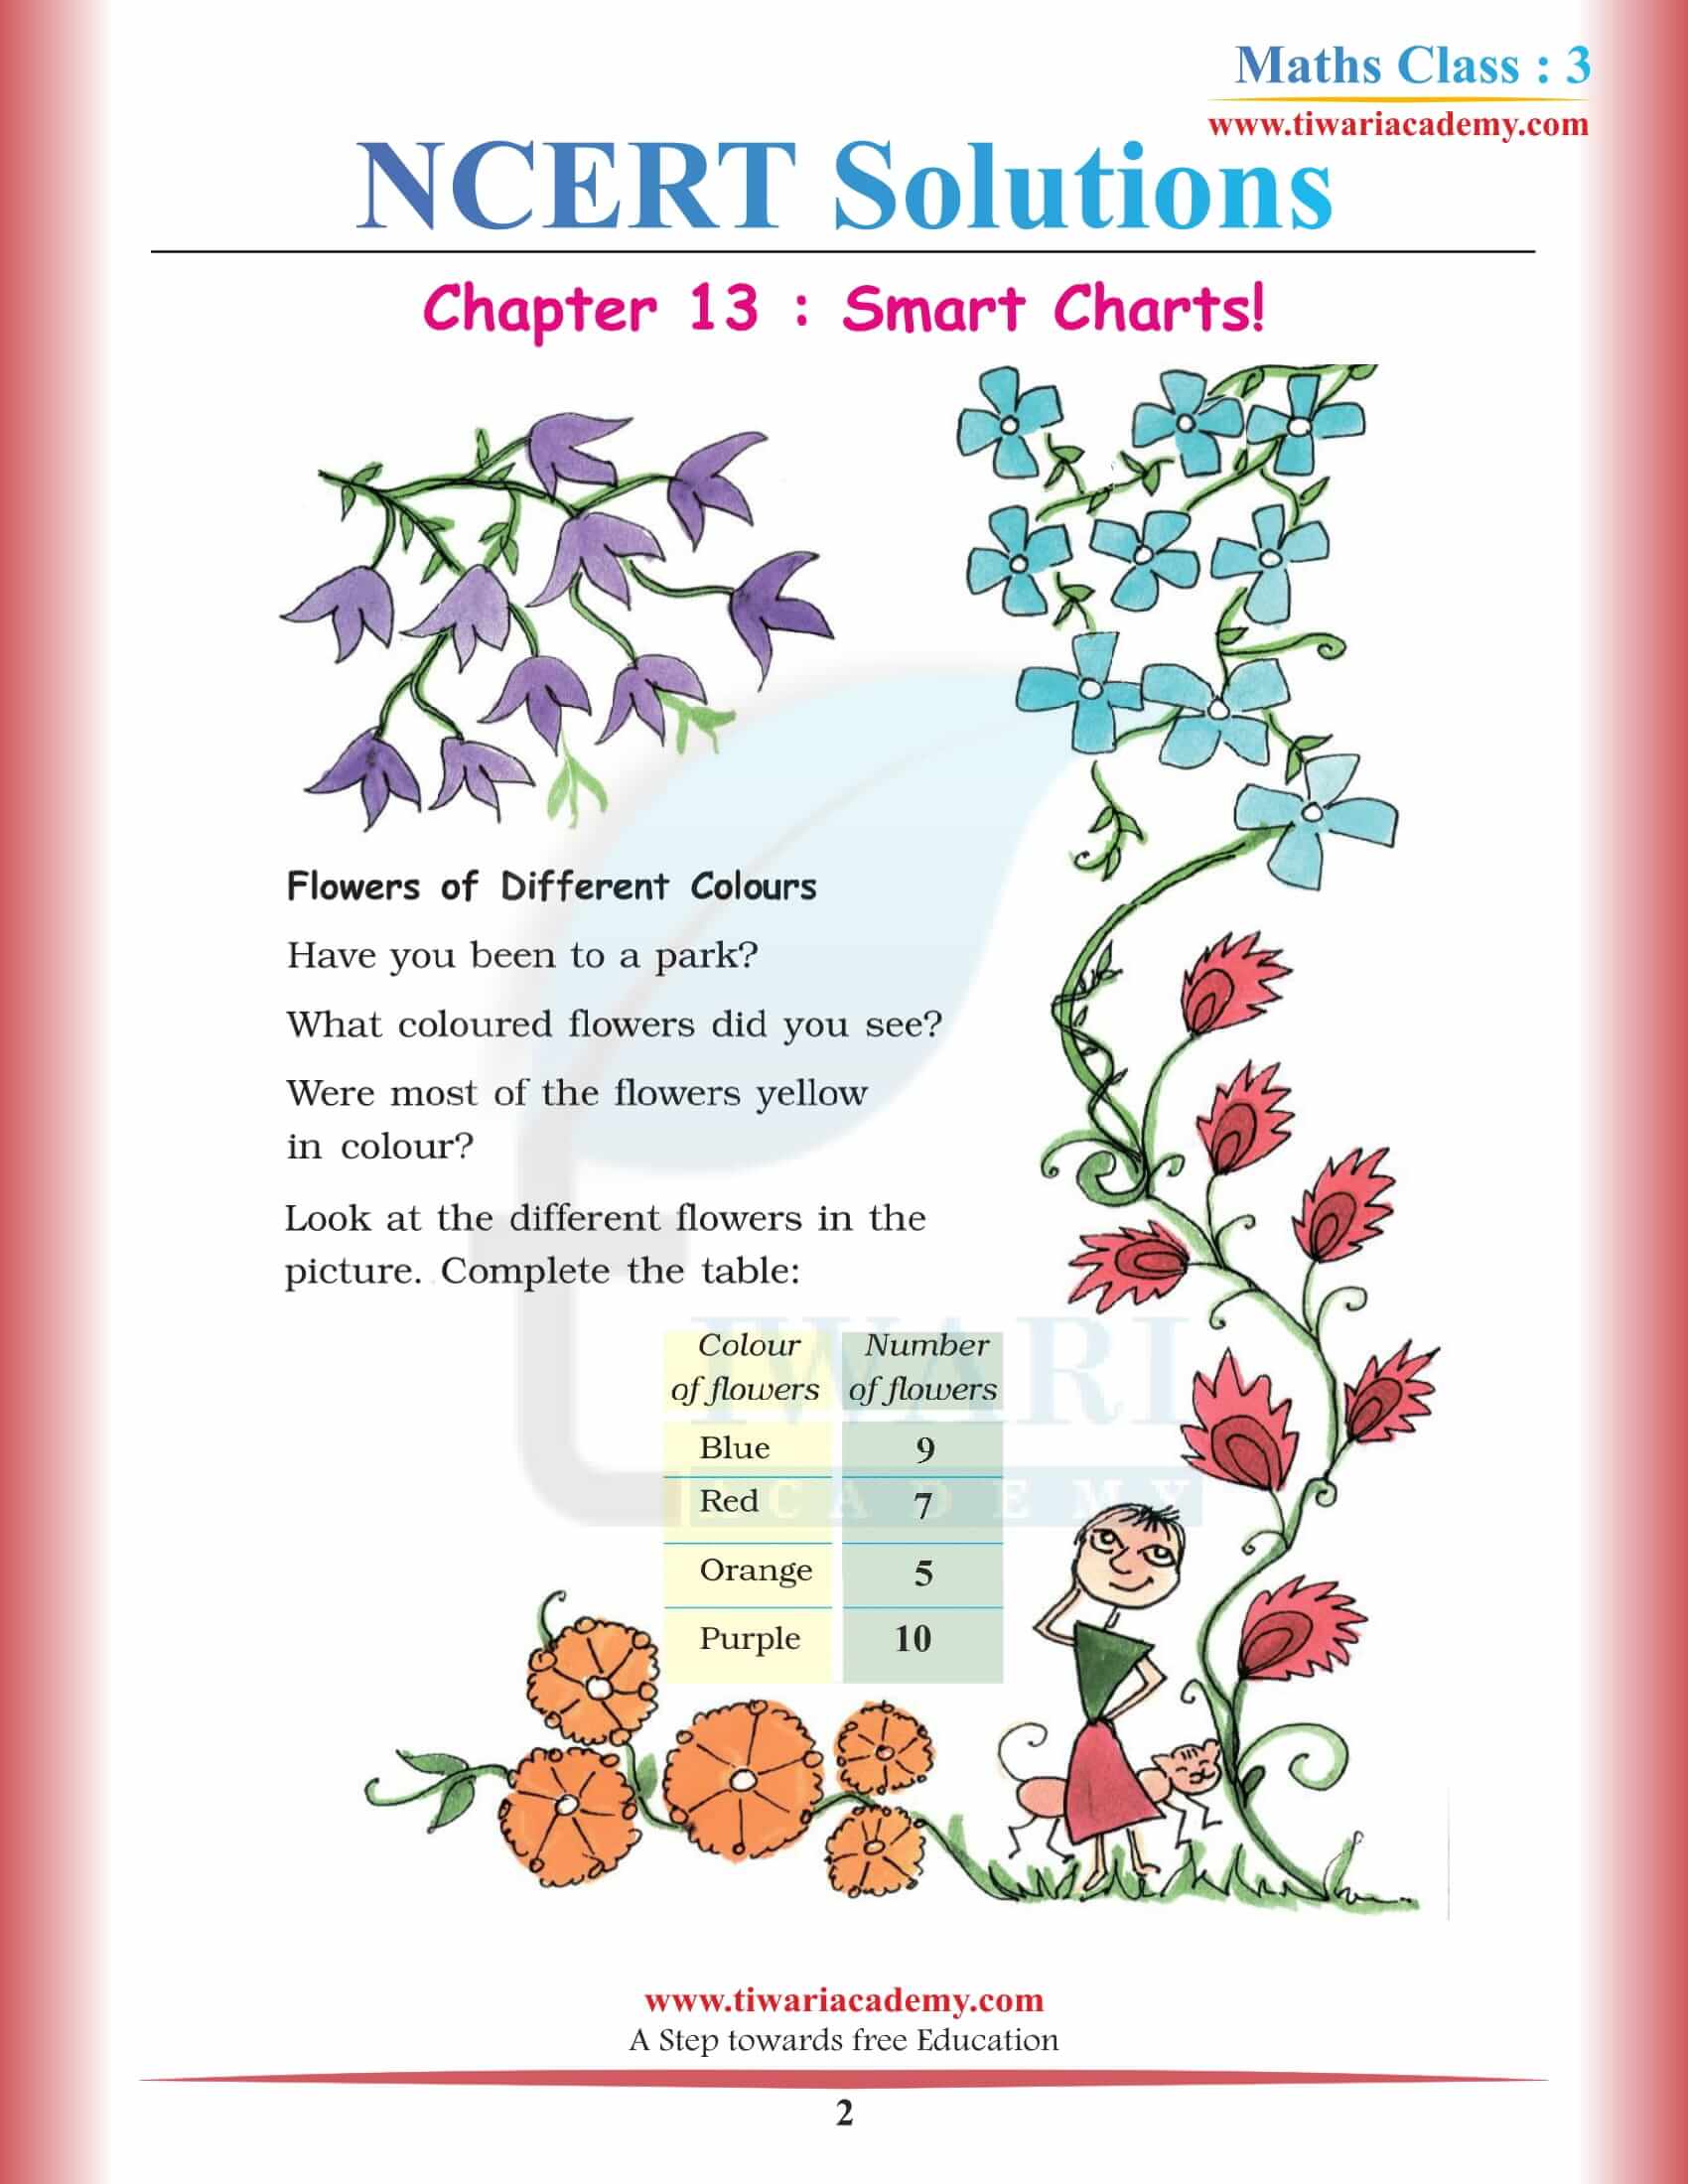 NCERT Solutions for Class 3 Maths Chapter 13 Smart Charts in PDF